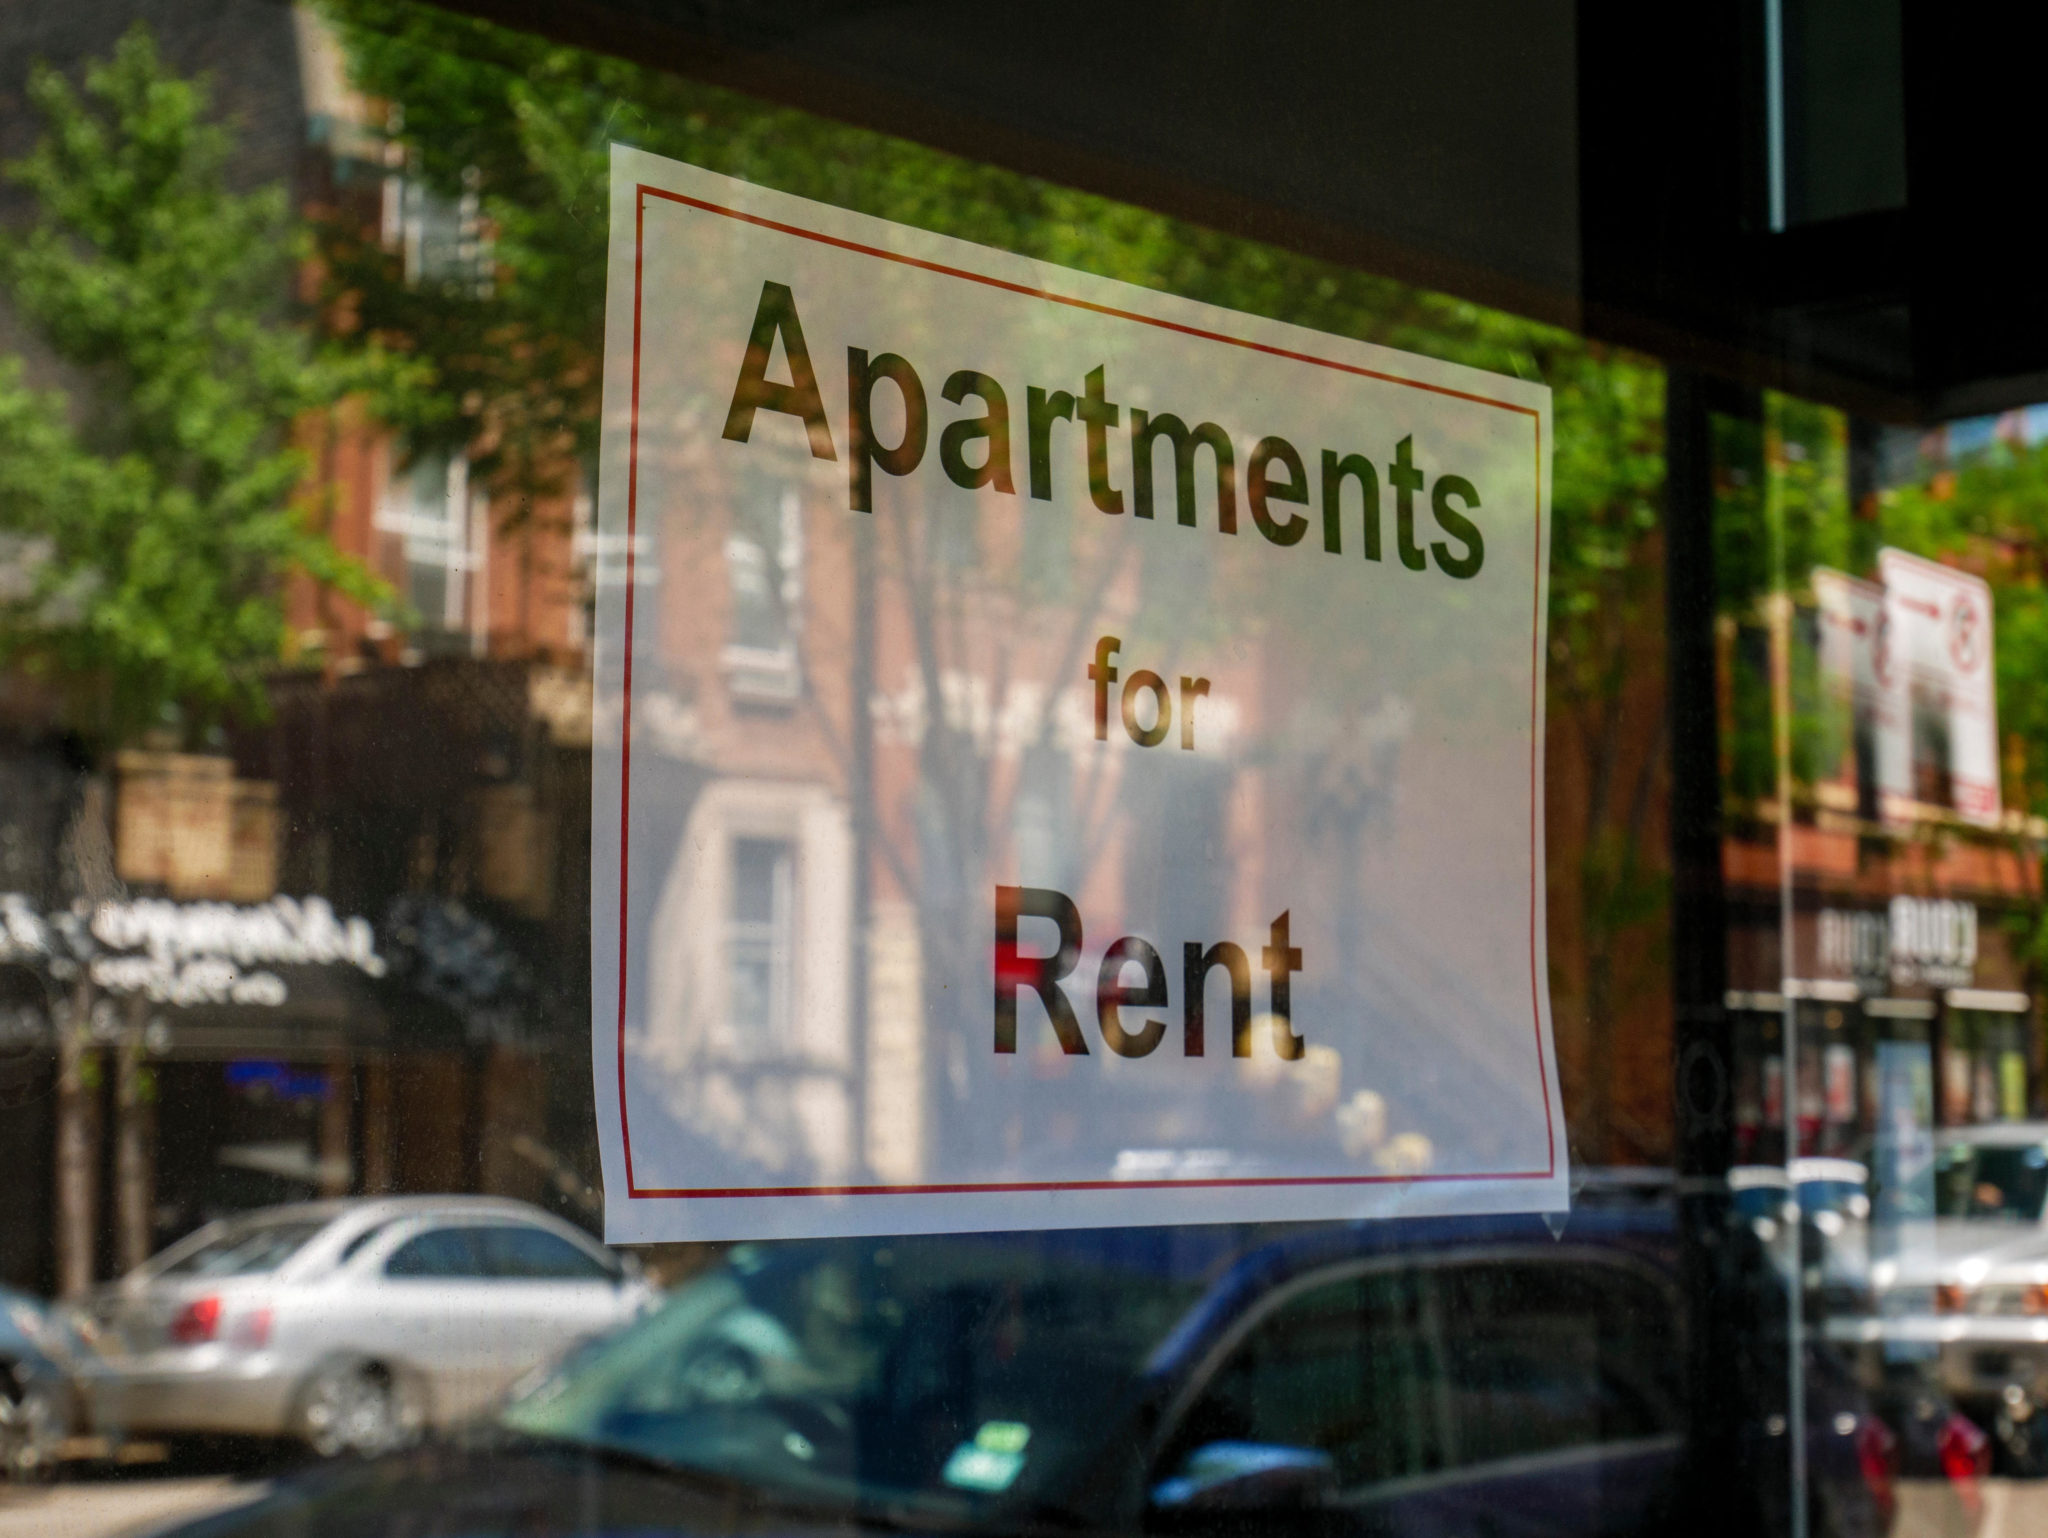 An 'Apartments for Rent' sign is seen in June 2019